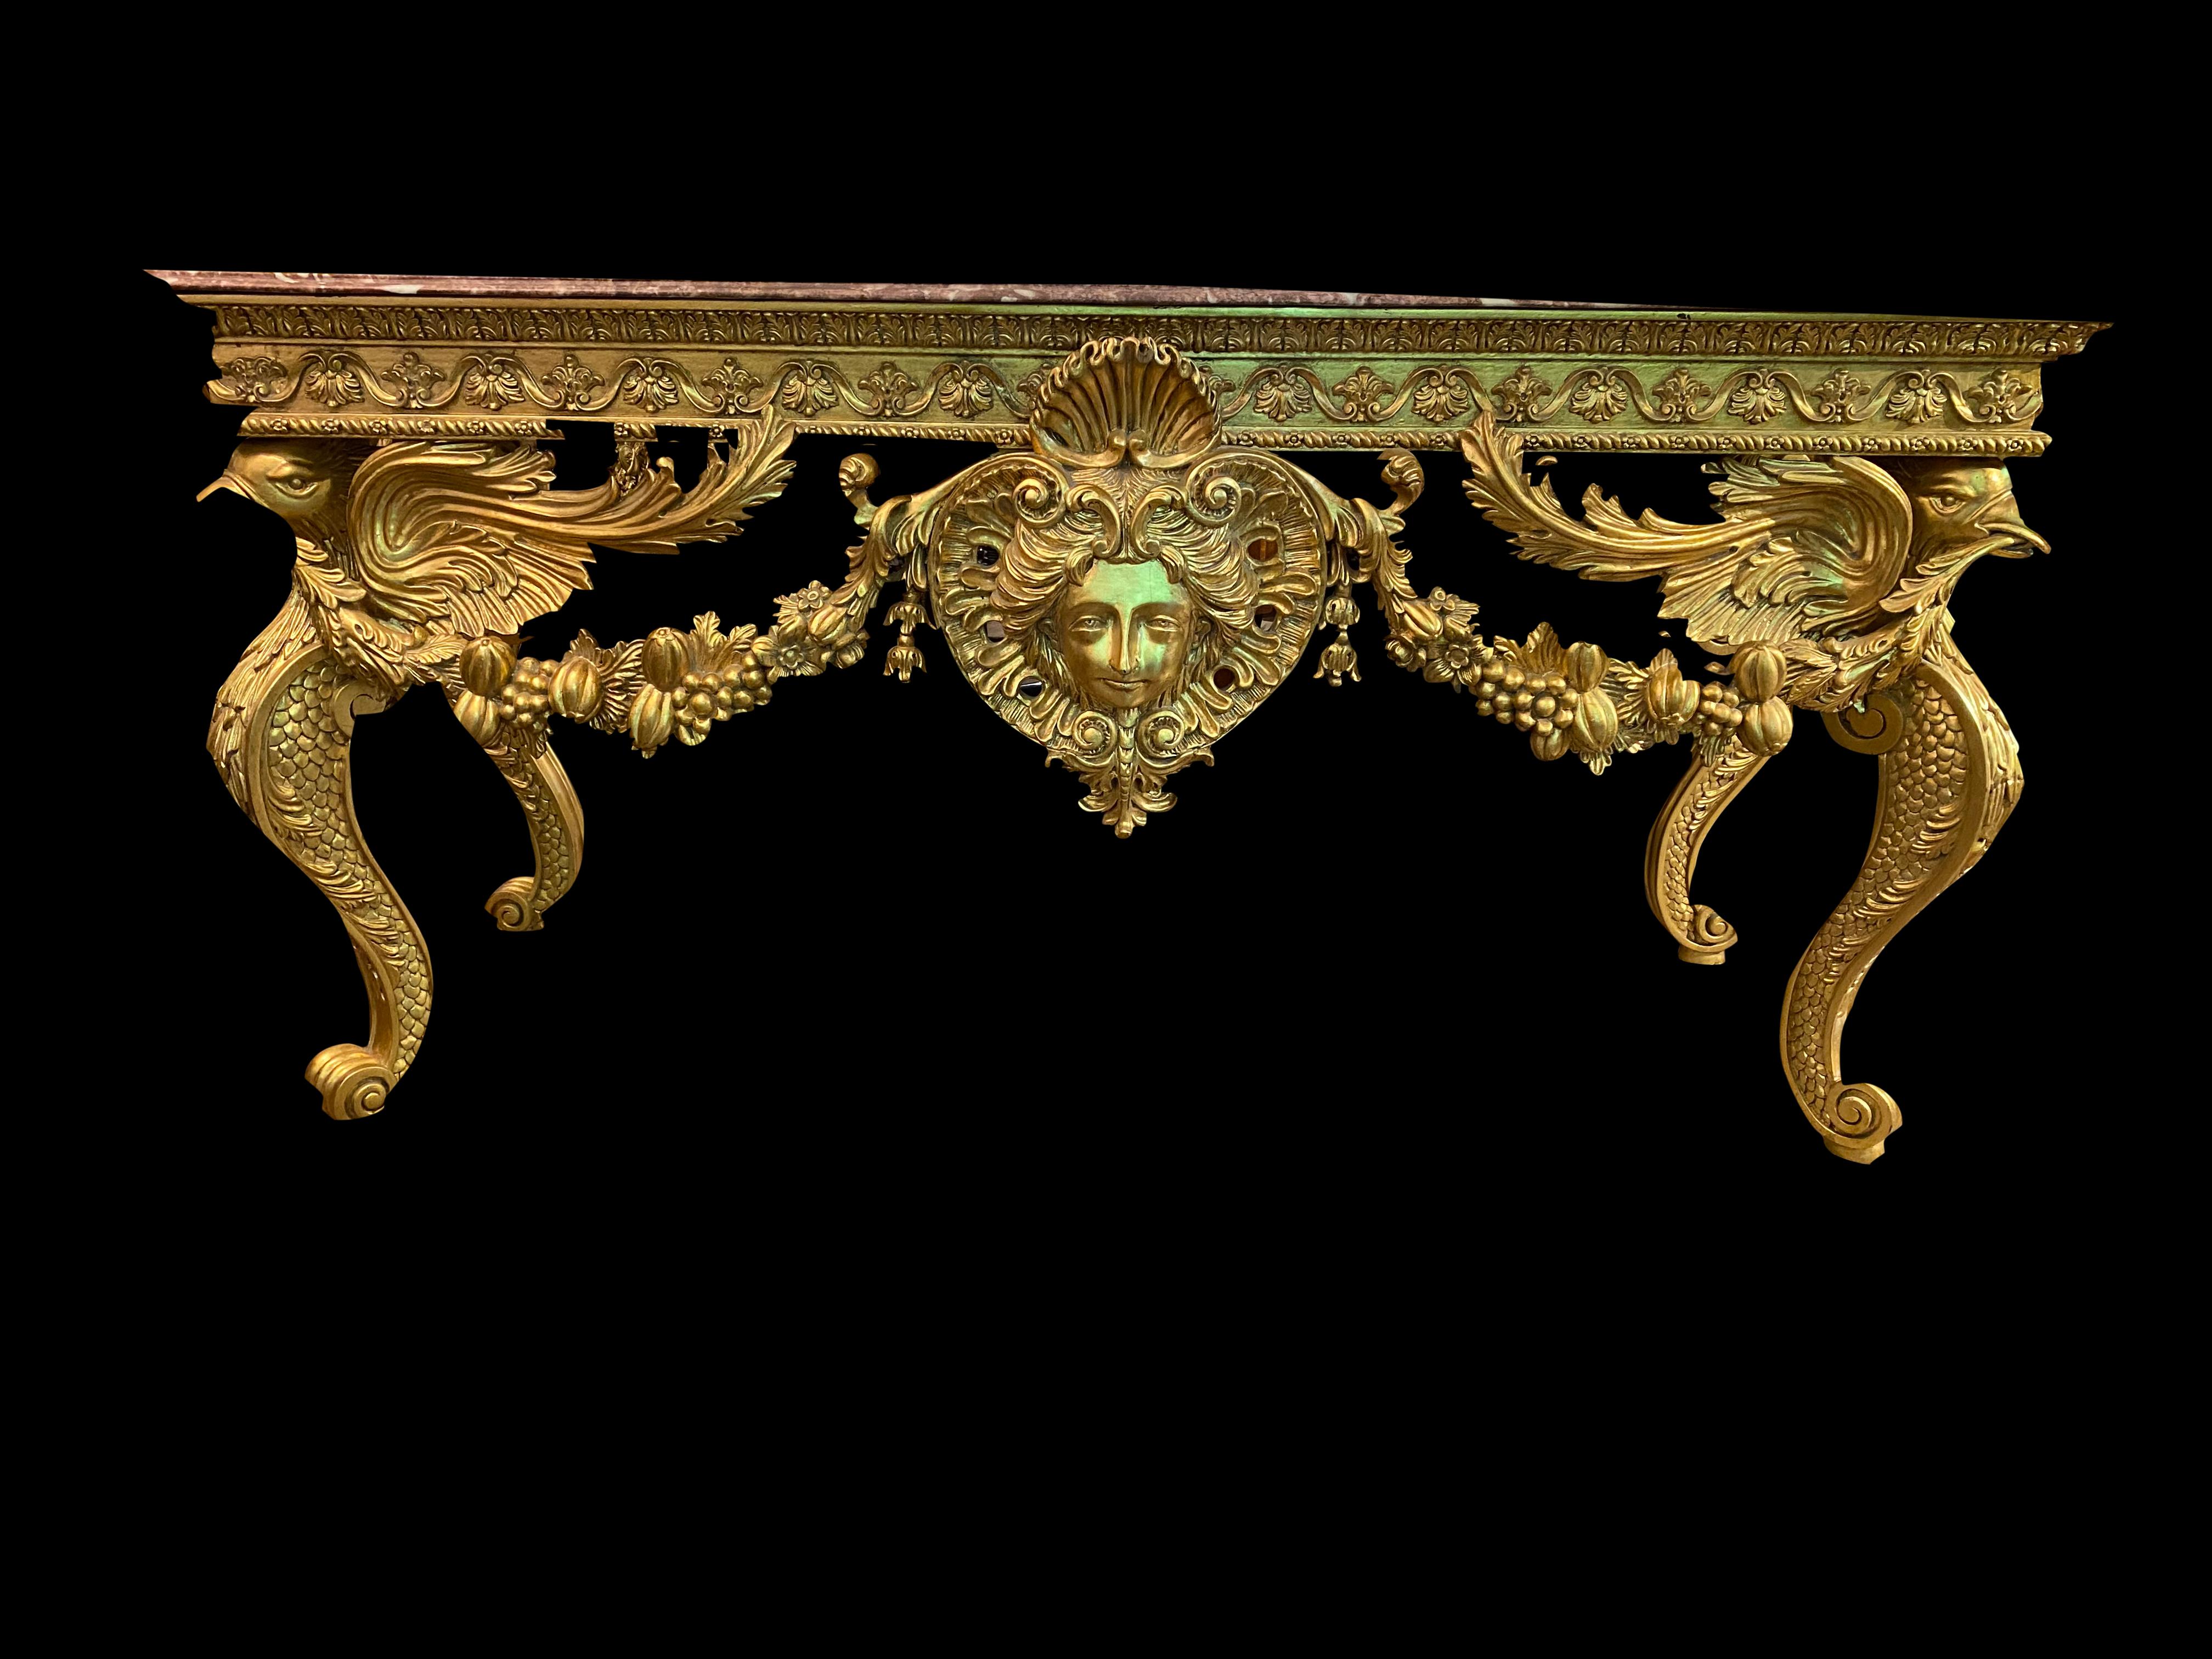 A beautiful large Italian gold gilded Rococo console table with Rosso Verona marble top and griffin legs.
This console table has a pierced skirt centered by a rococo foliate ornament with complex volute floral and foliate carved cabriole and